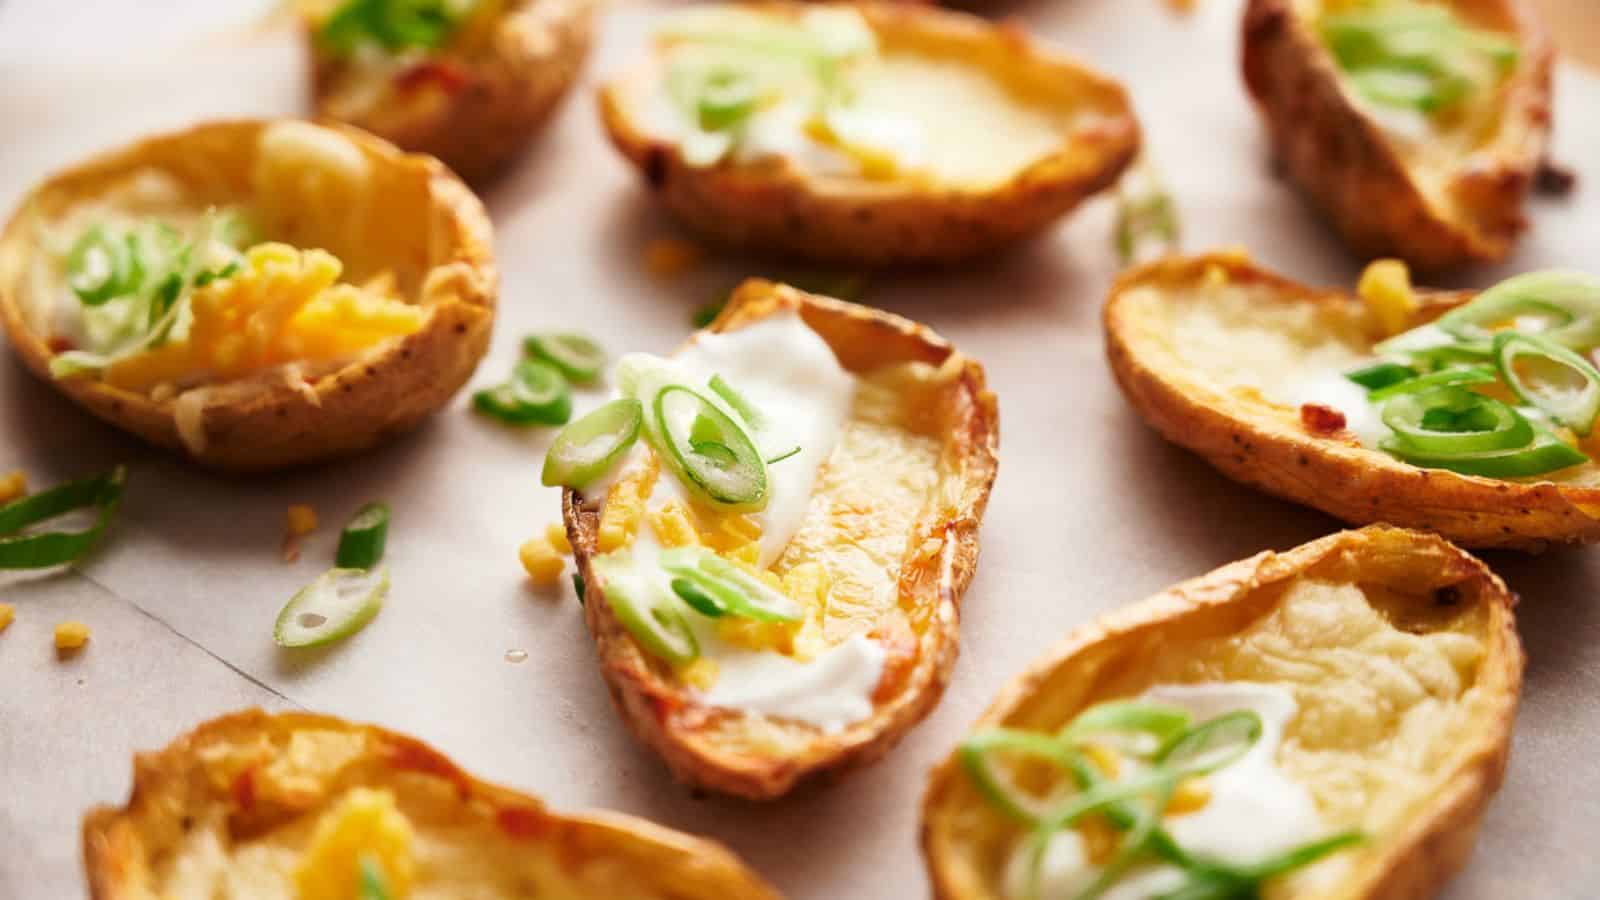 Potato skins with sour cream and sliced scallions.